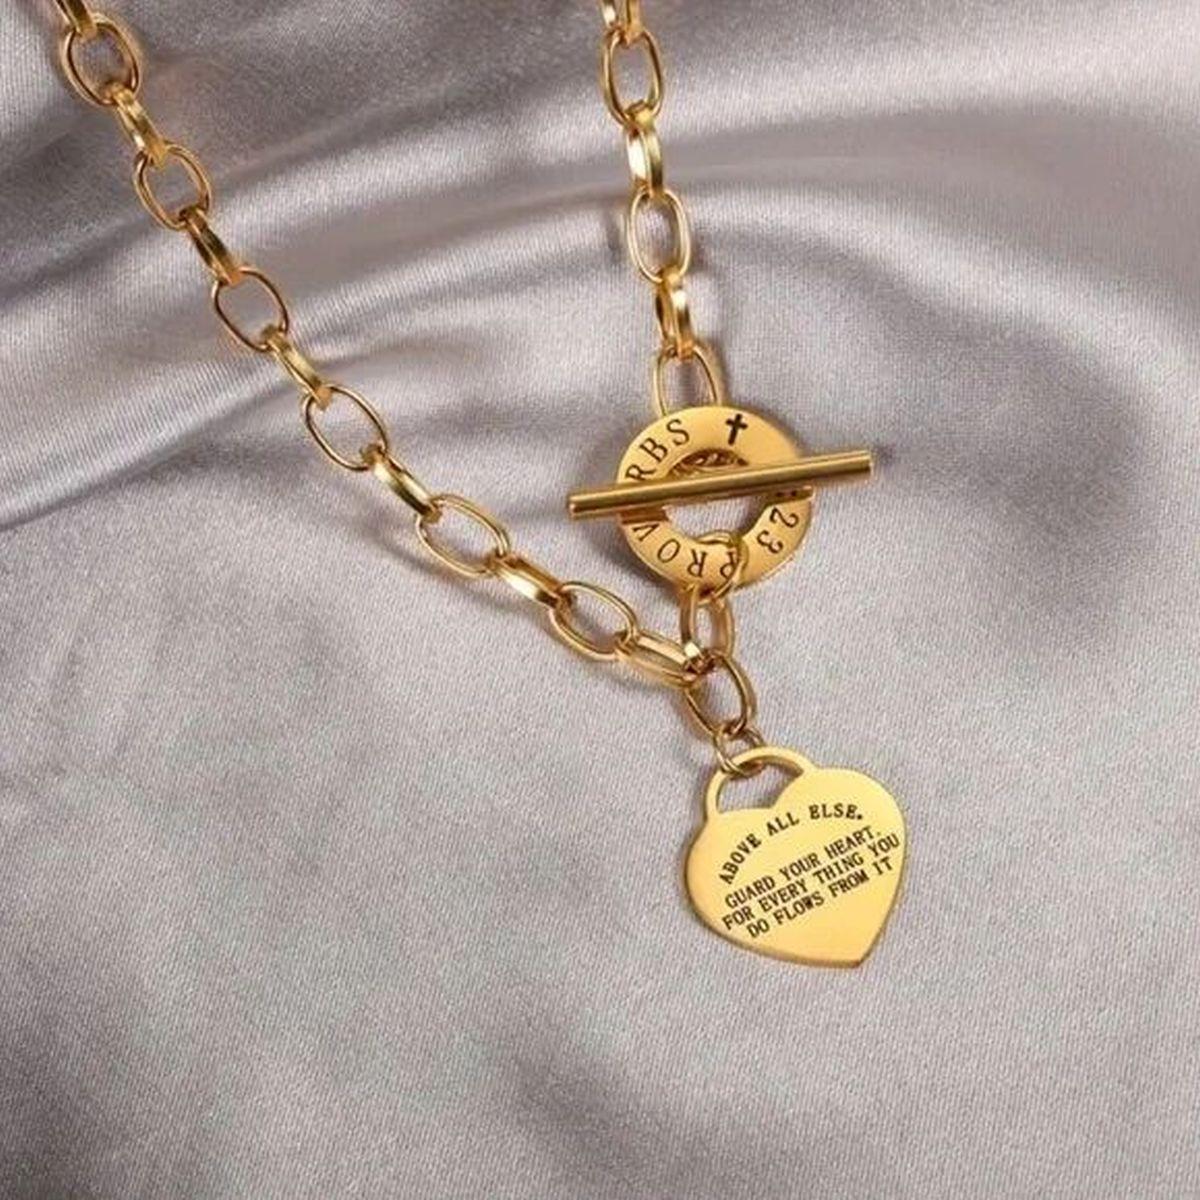 Simply Beautiful! Vintage 18K Gold plated Heart Lock Pendant Toggle Link Necklace. Inscribed: Above All Else Guard Your Heart for Everything You Do Flows From It! Necklace measures approx. 18” long. New. Never worn. More Beautiful in Real time!